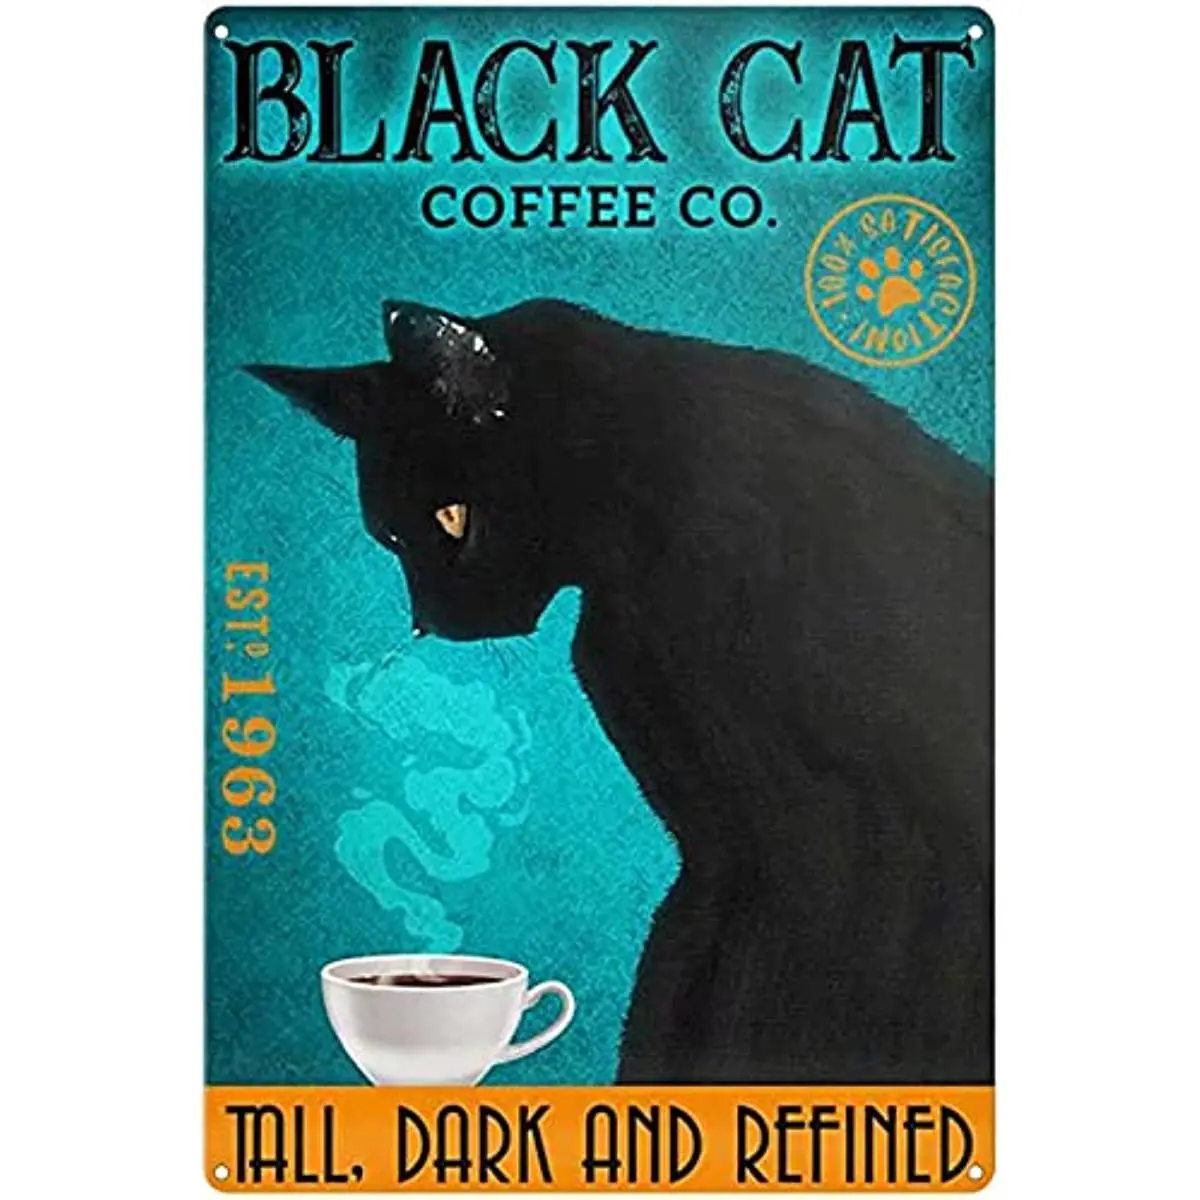 

Black Cat Metal Tin Sign,Cat Coffee Co,Tall Dark and Refined,Retro Tin Sign for Home Hotel Bar Cafe Outdoor Wall Decoration